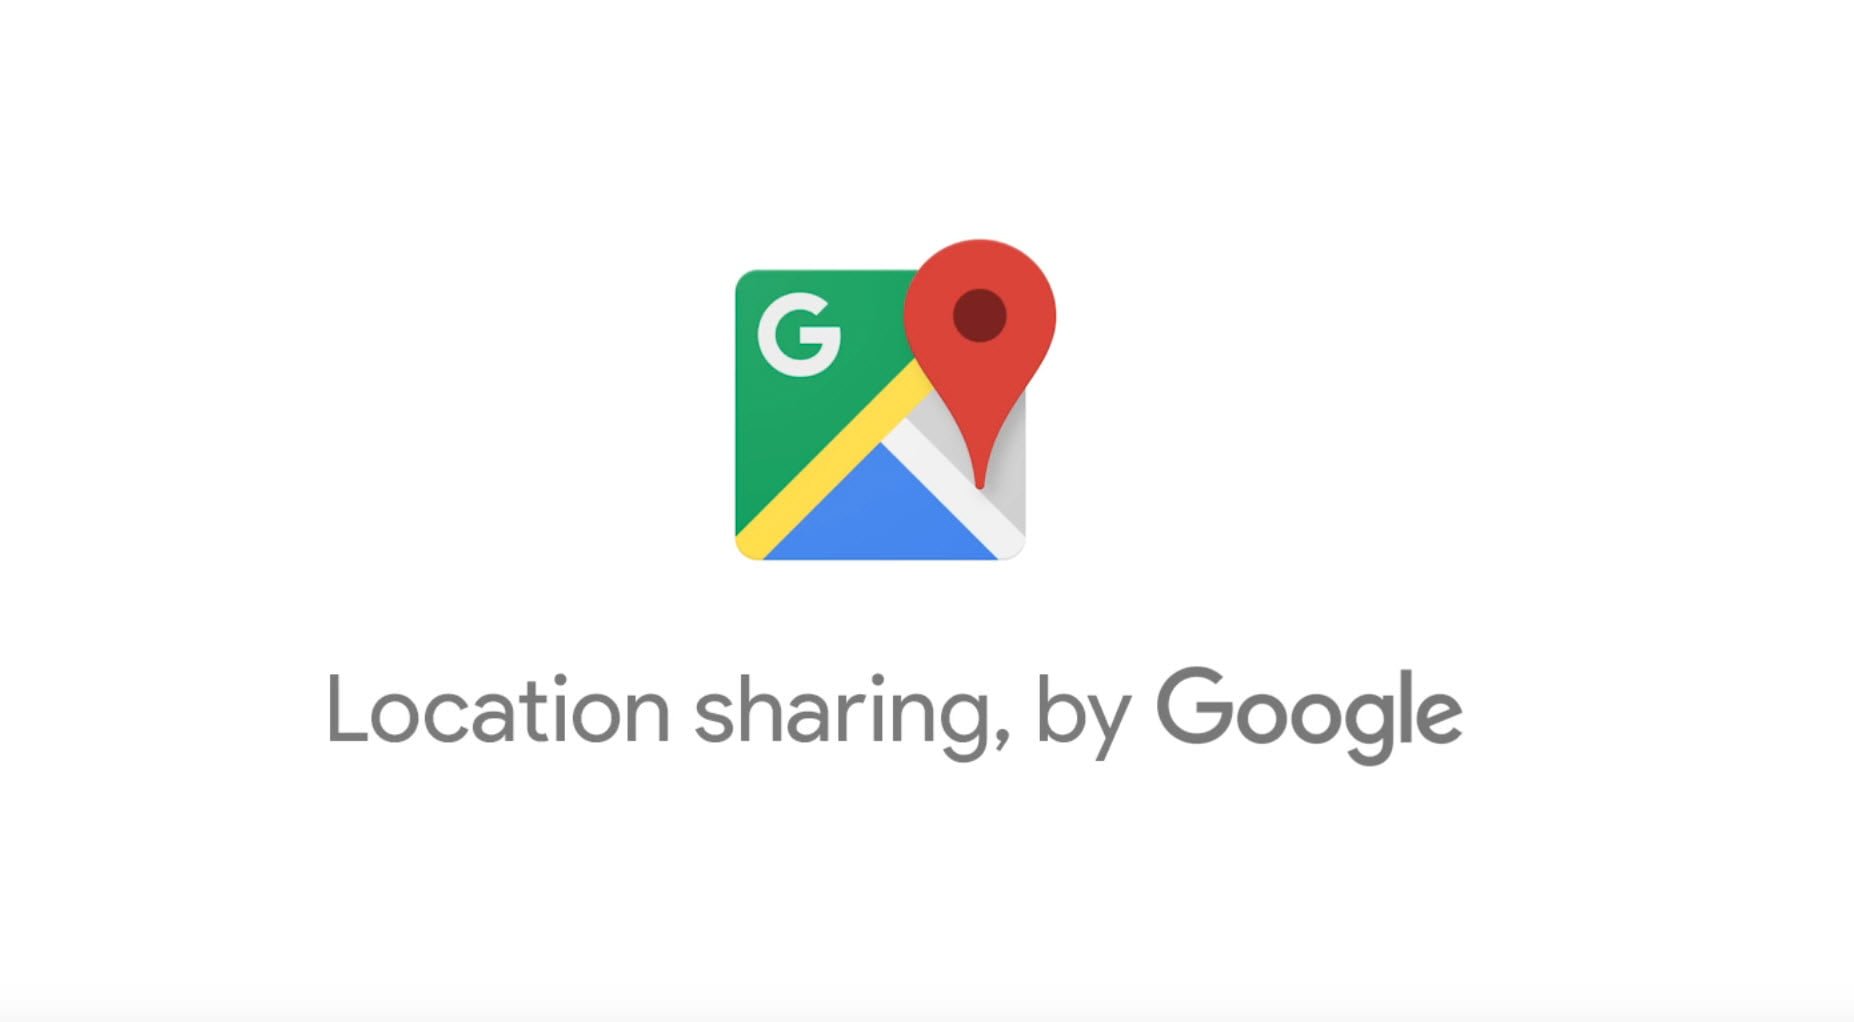 Real-Time Location Sharing Coming Soon to Google Maps